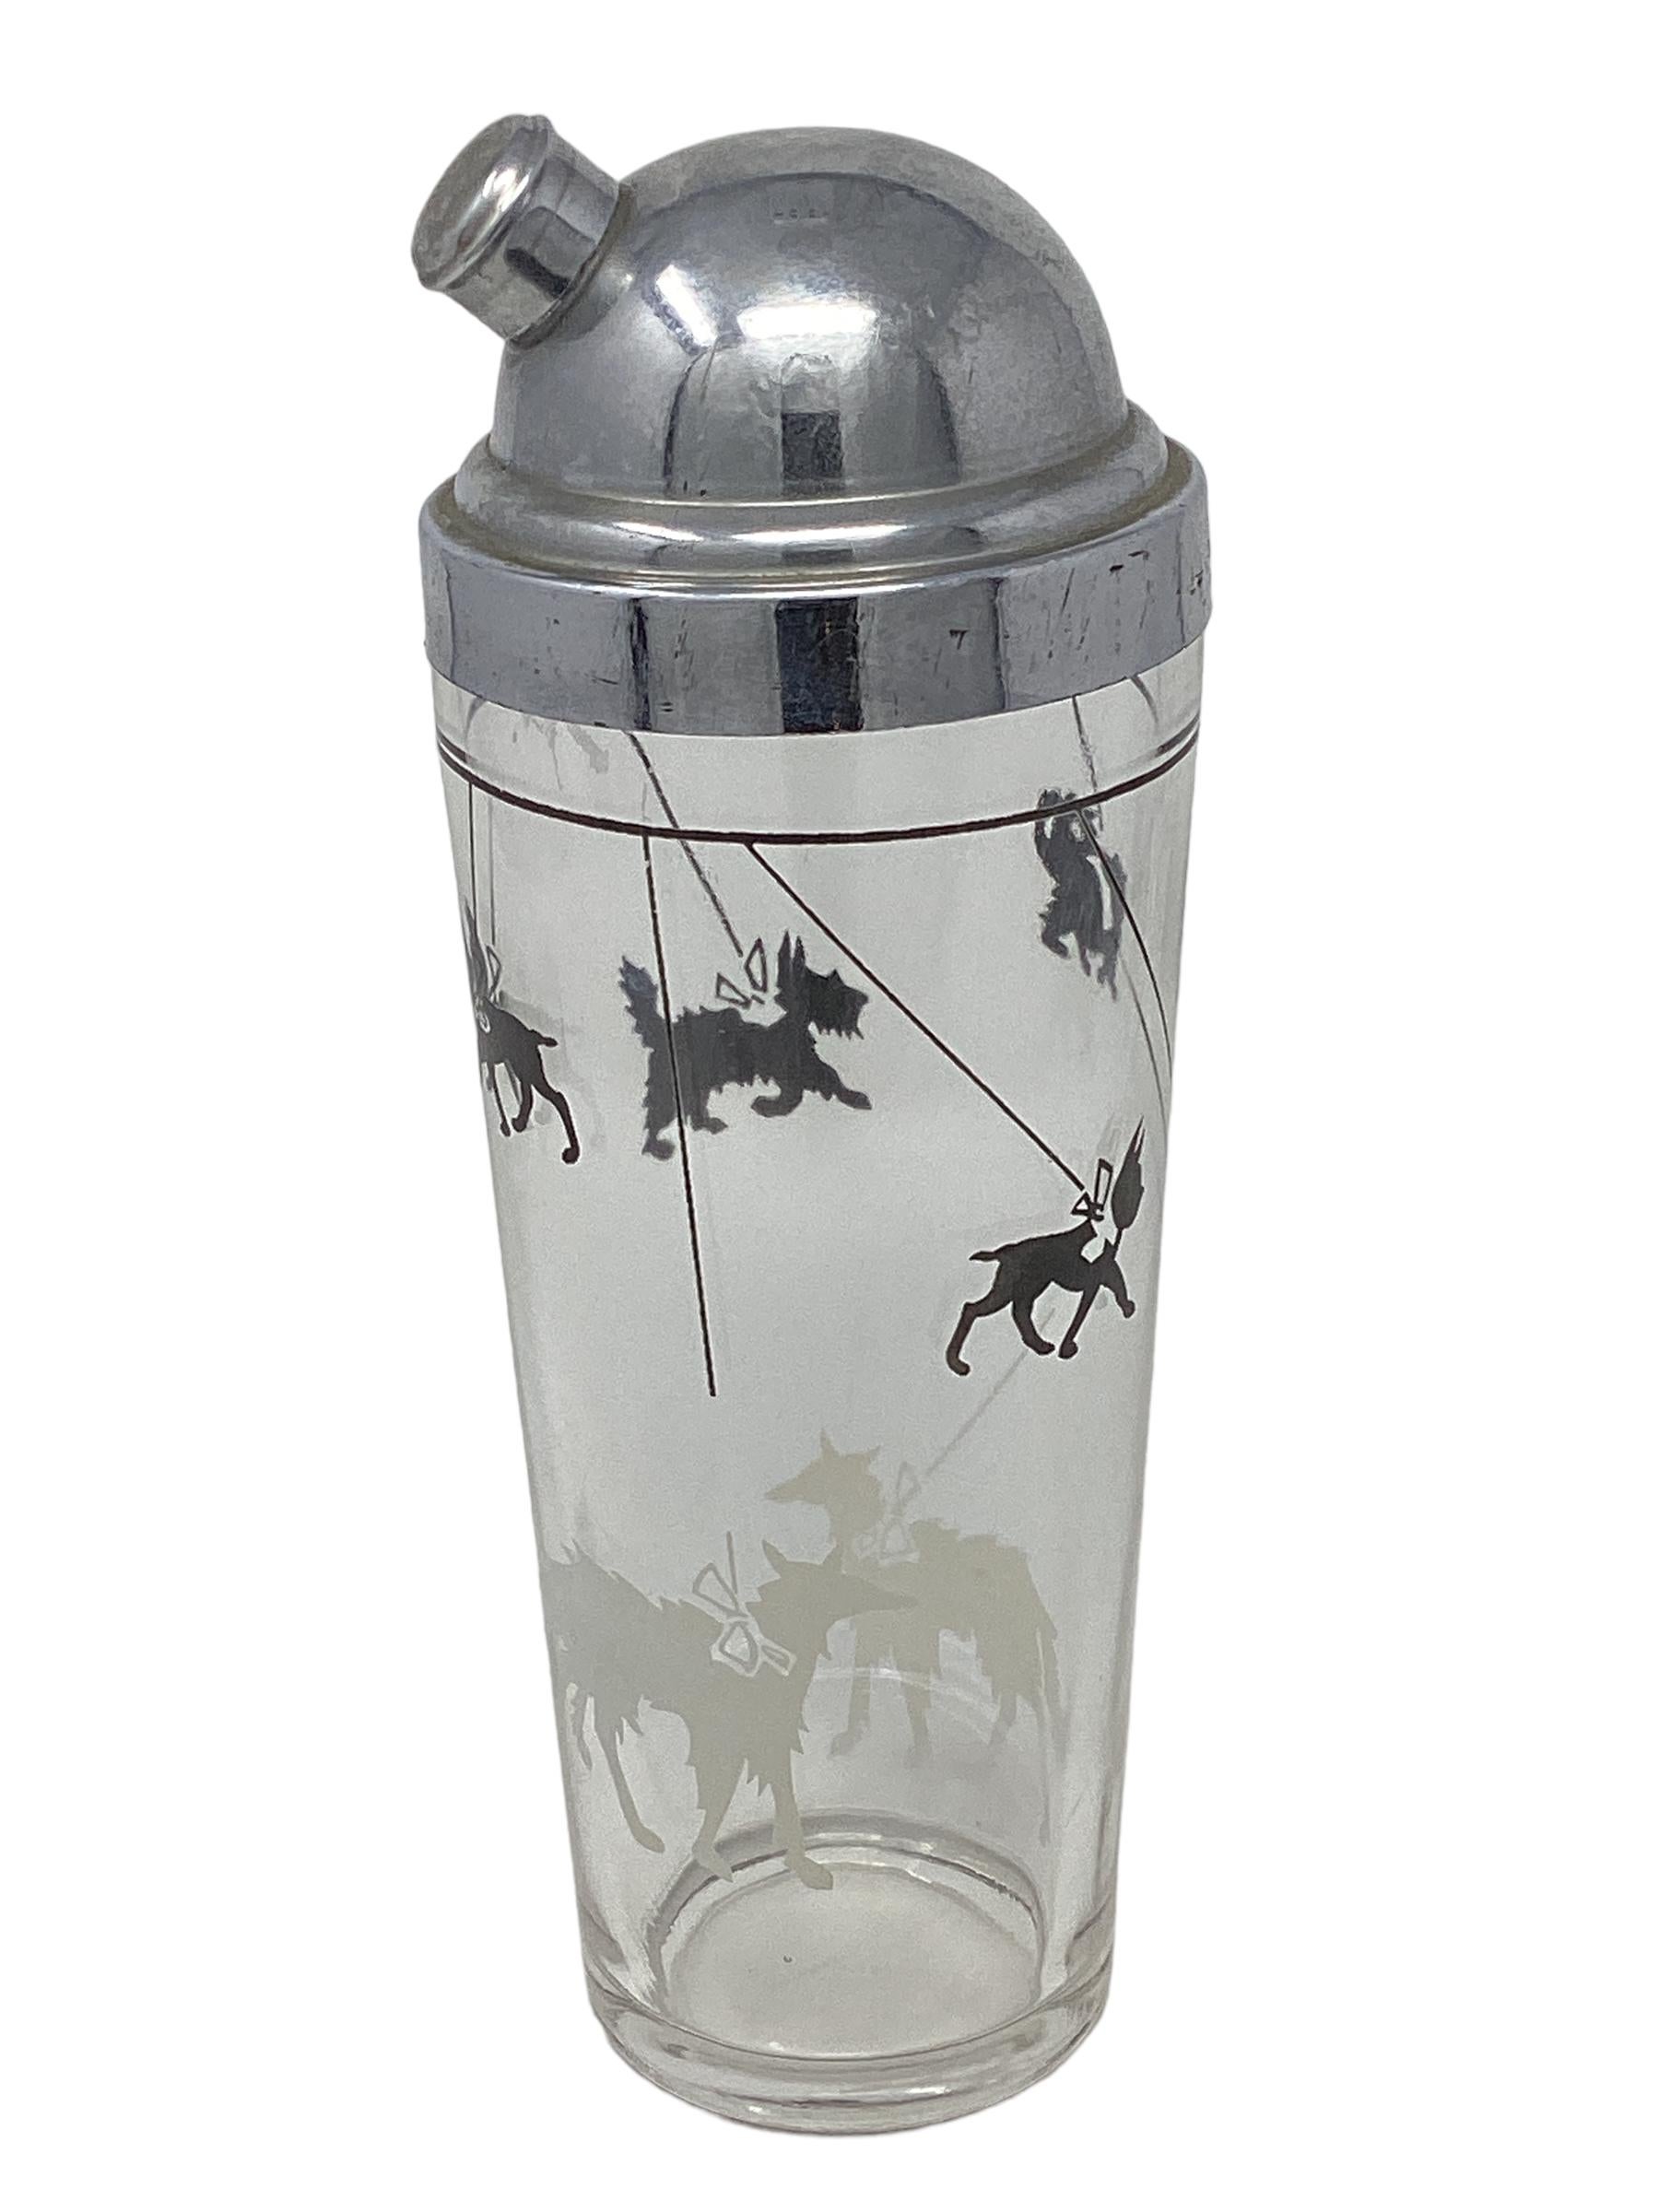 Art Deco Hazel-Atlas Cocktail Shaker with Leashed Dogs For Sale 4